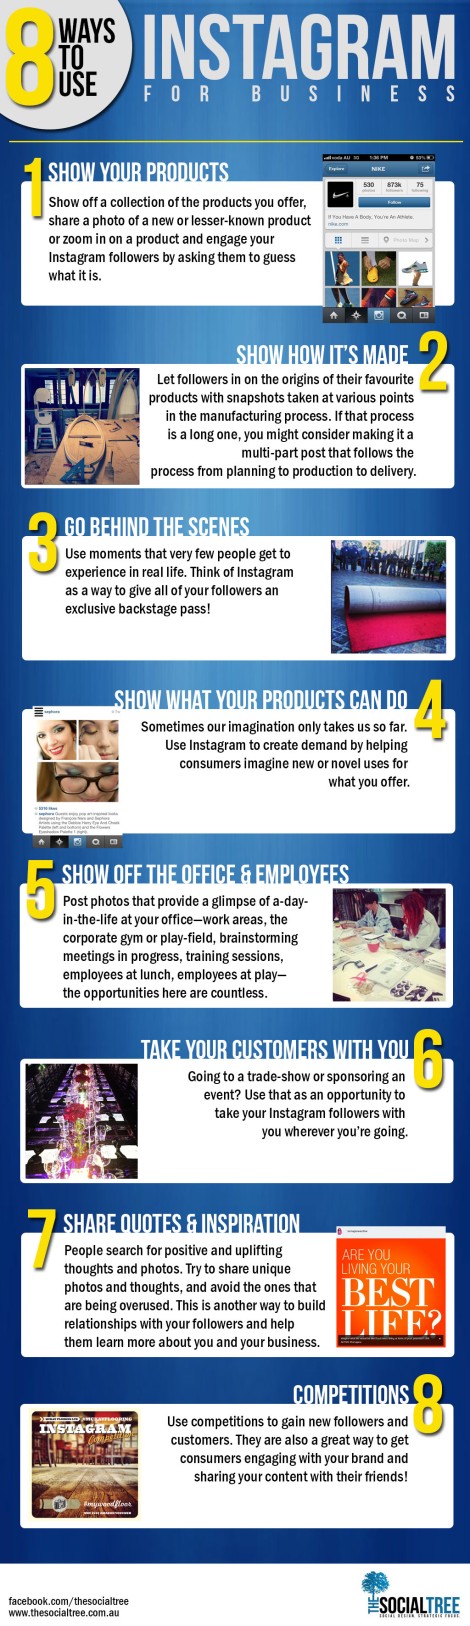 8-ways-to-use-instagram-for-business.png